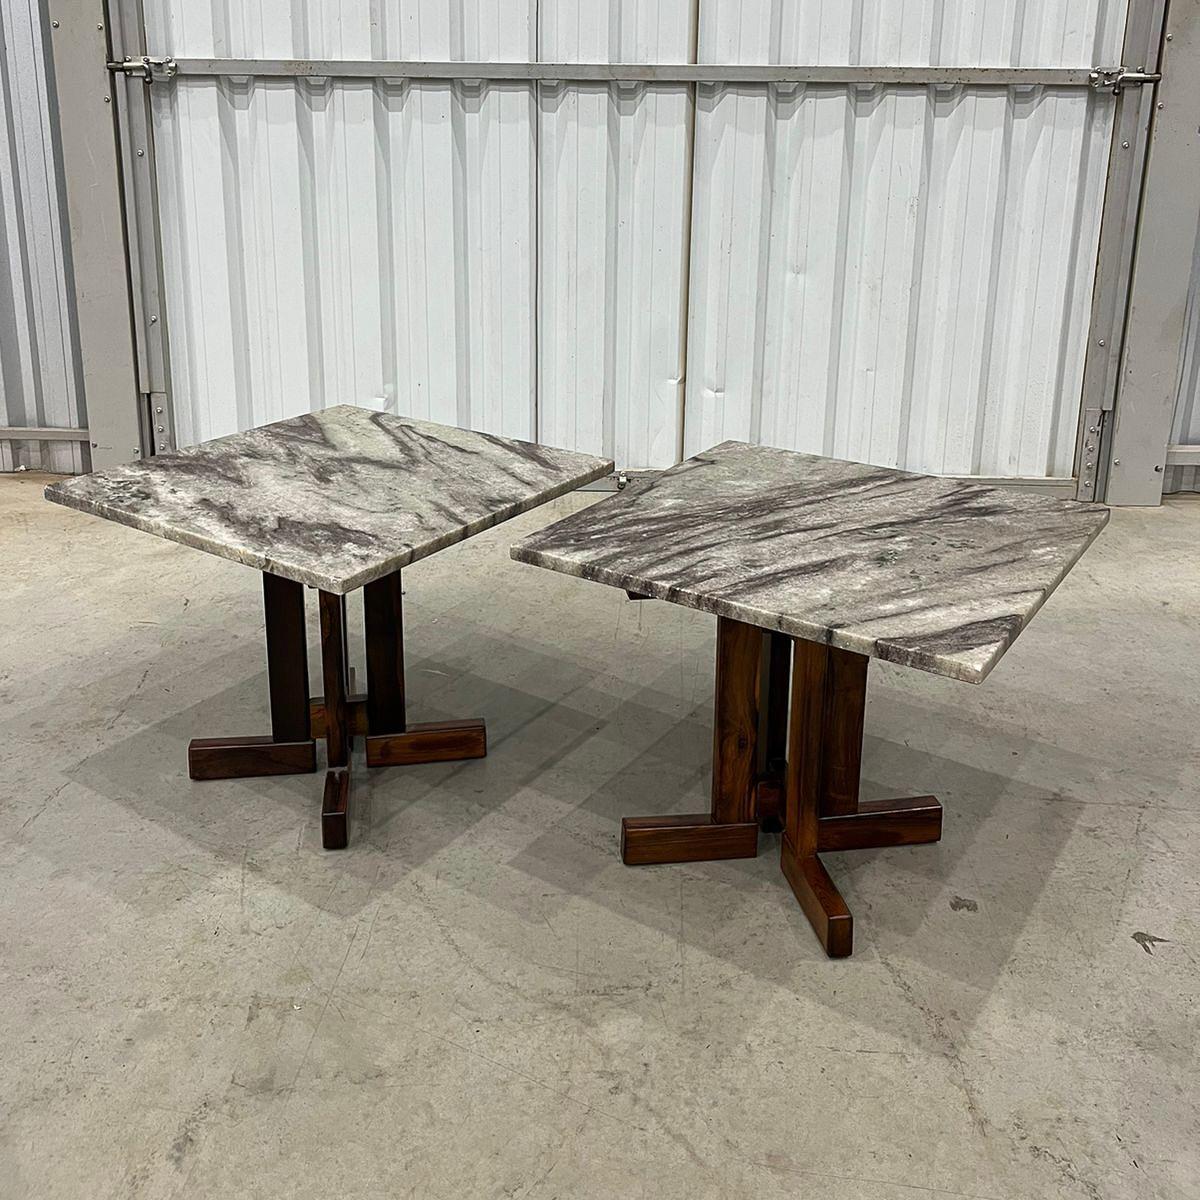 20th Century Brazilian Modern Pair of Side Tables in Rosewood and Granite by Celina, c. 1960 For Sale